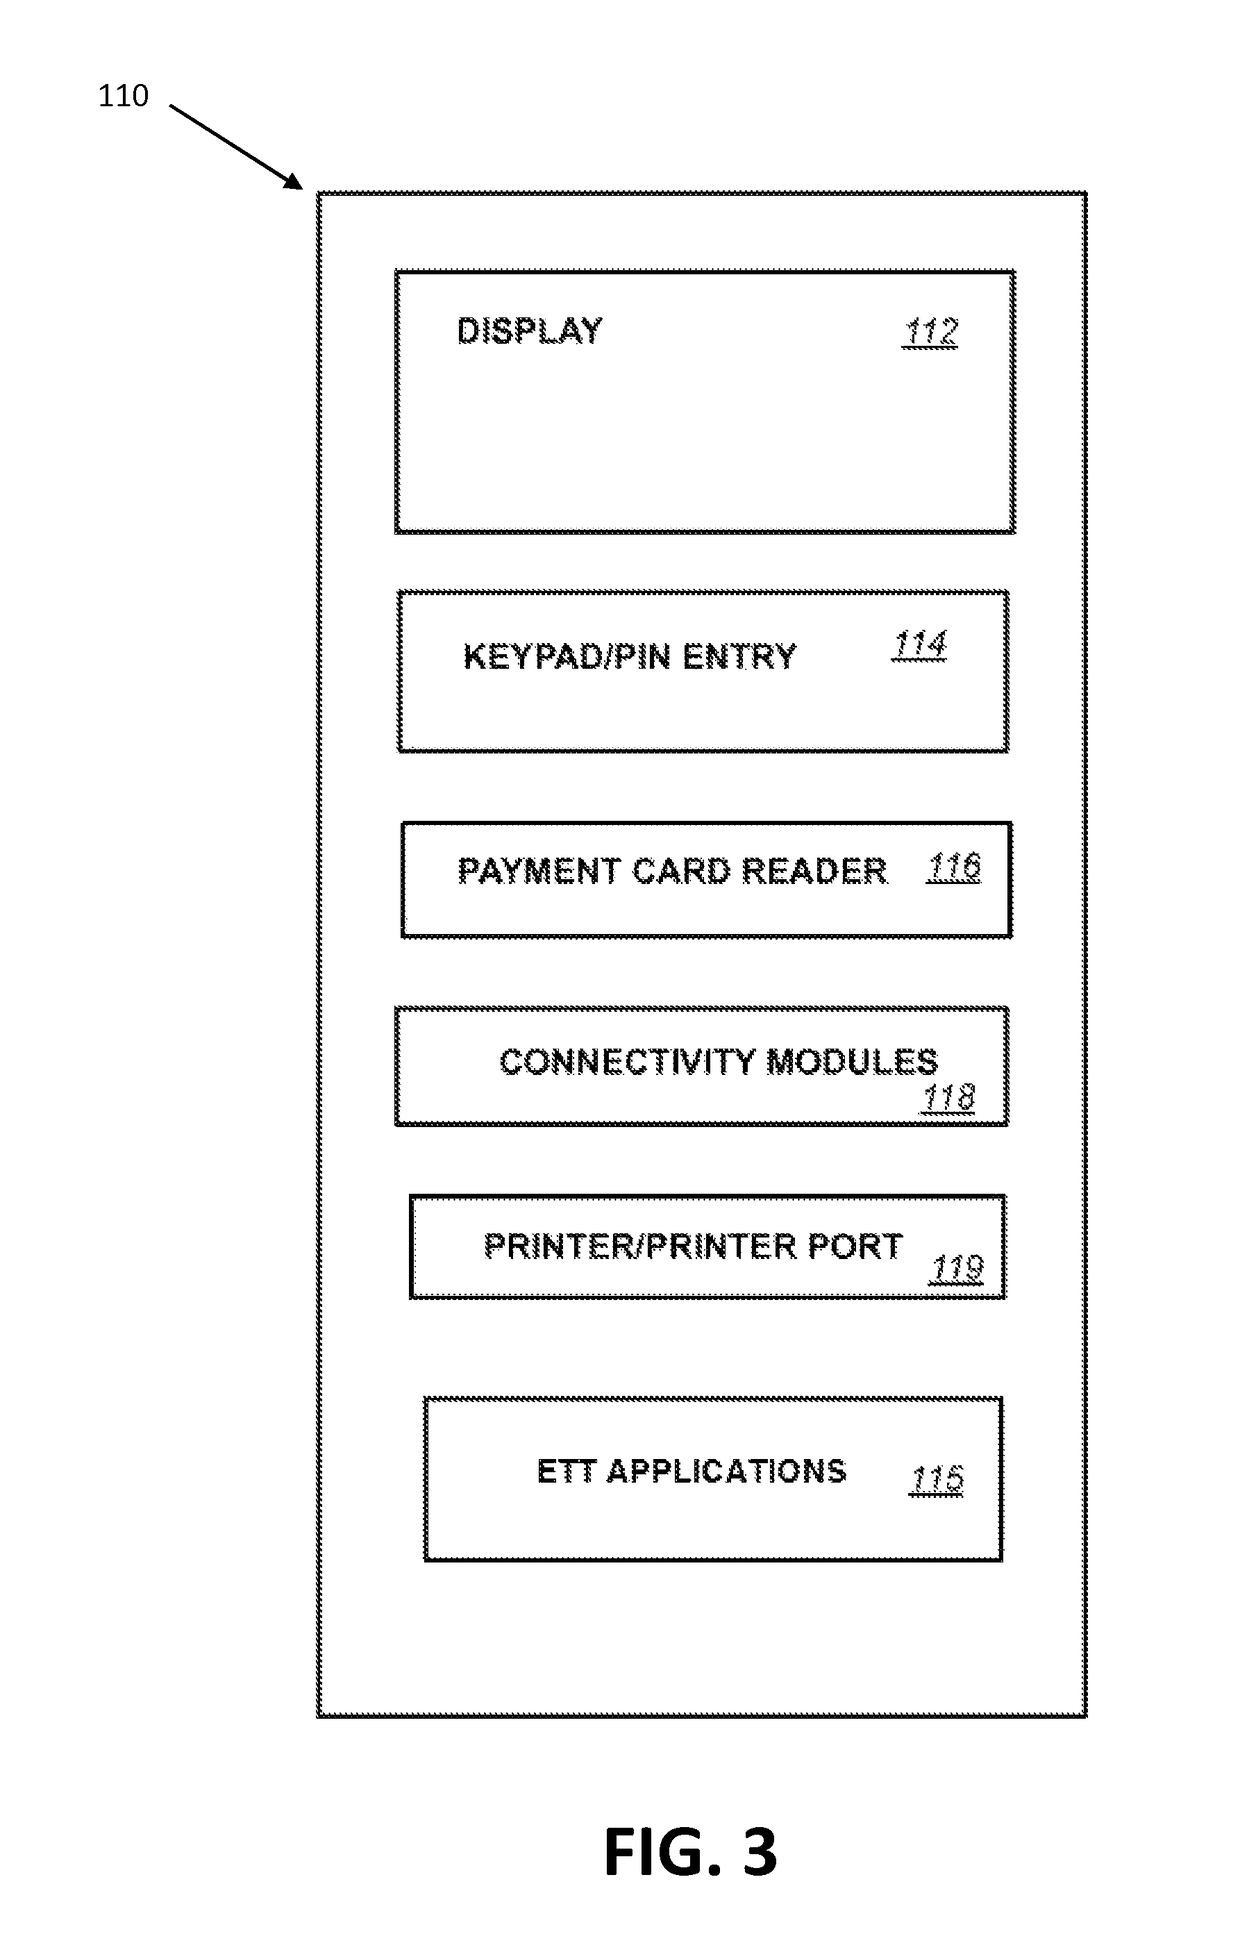 Electronic transaction systems and methods for gaming or amusement credit purchases